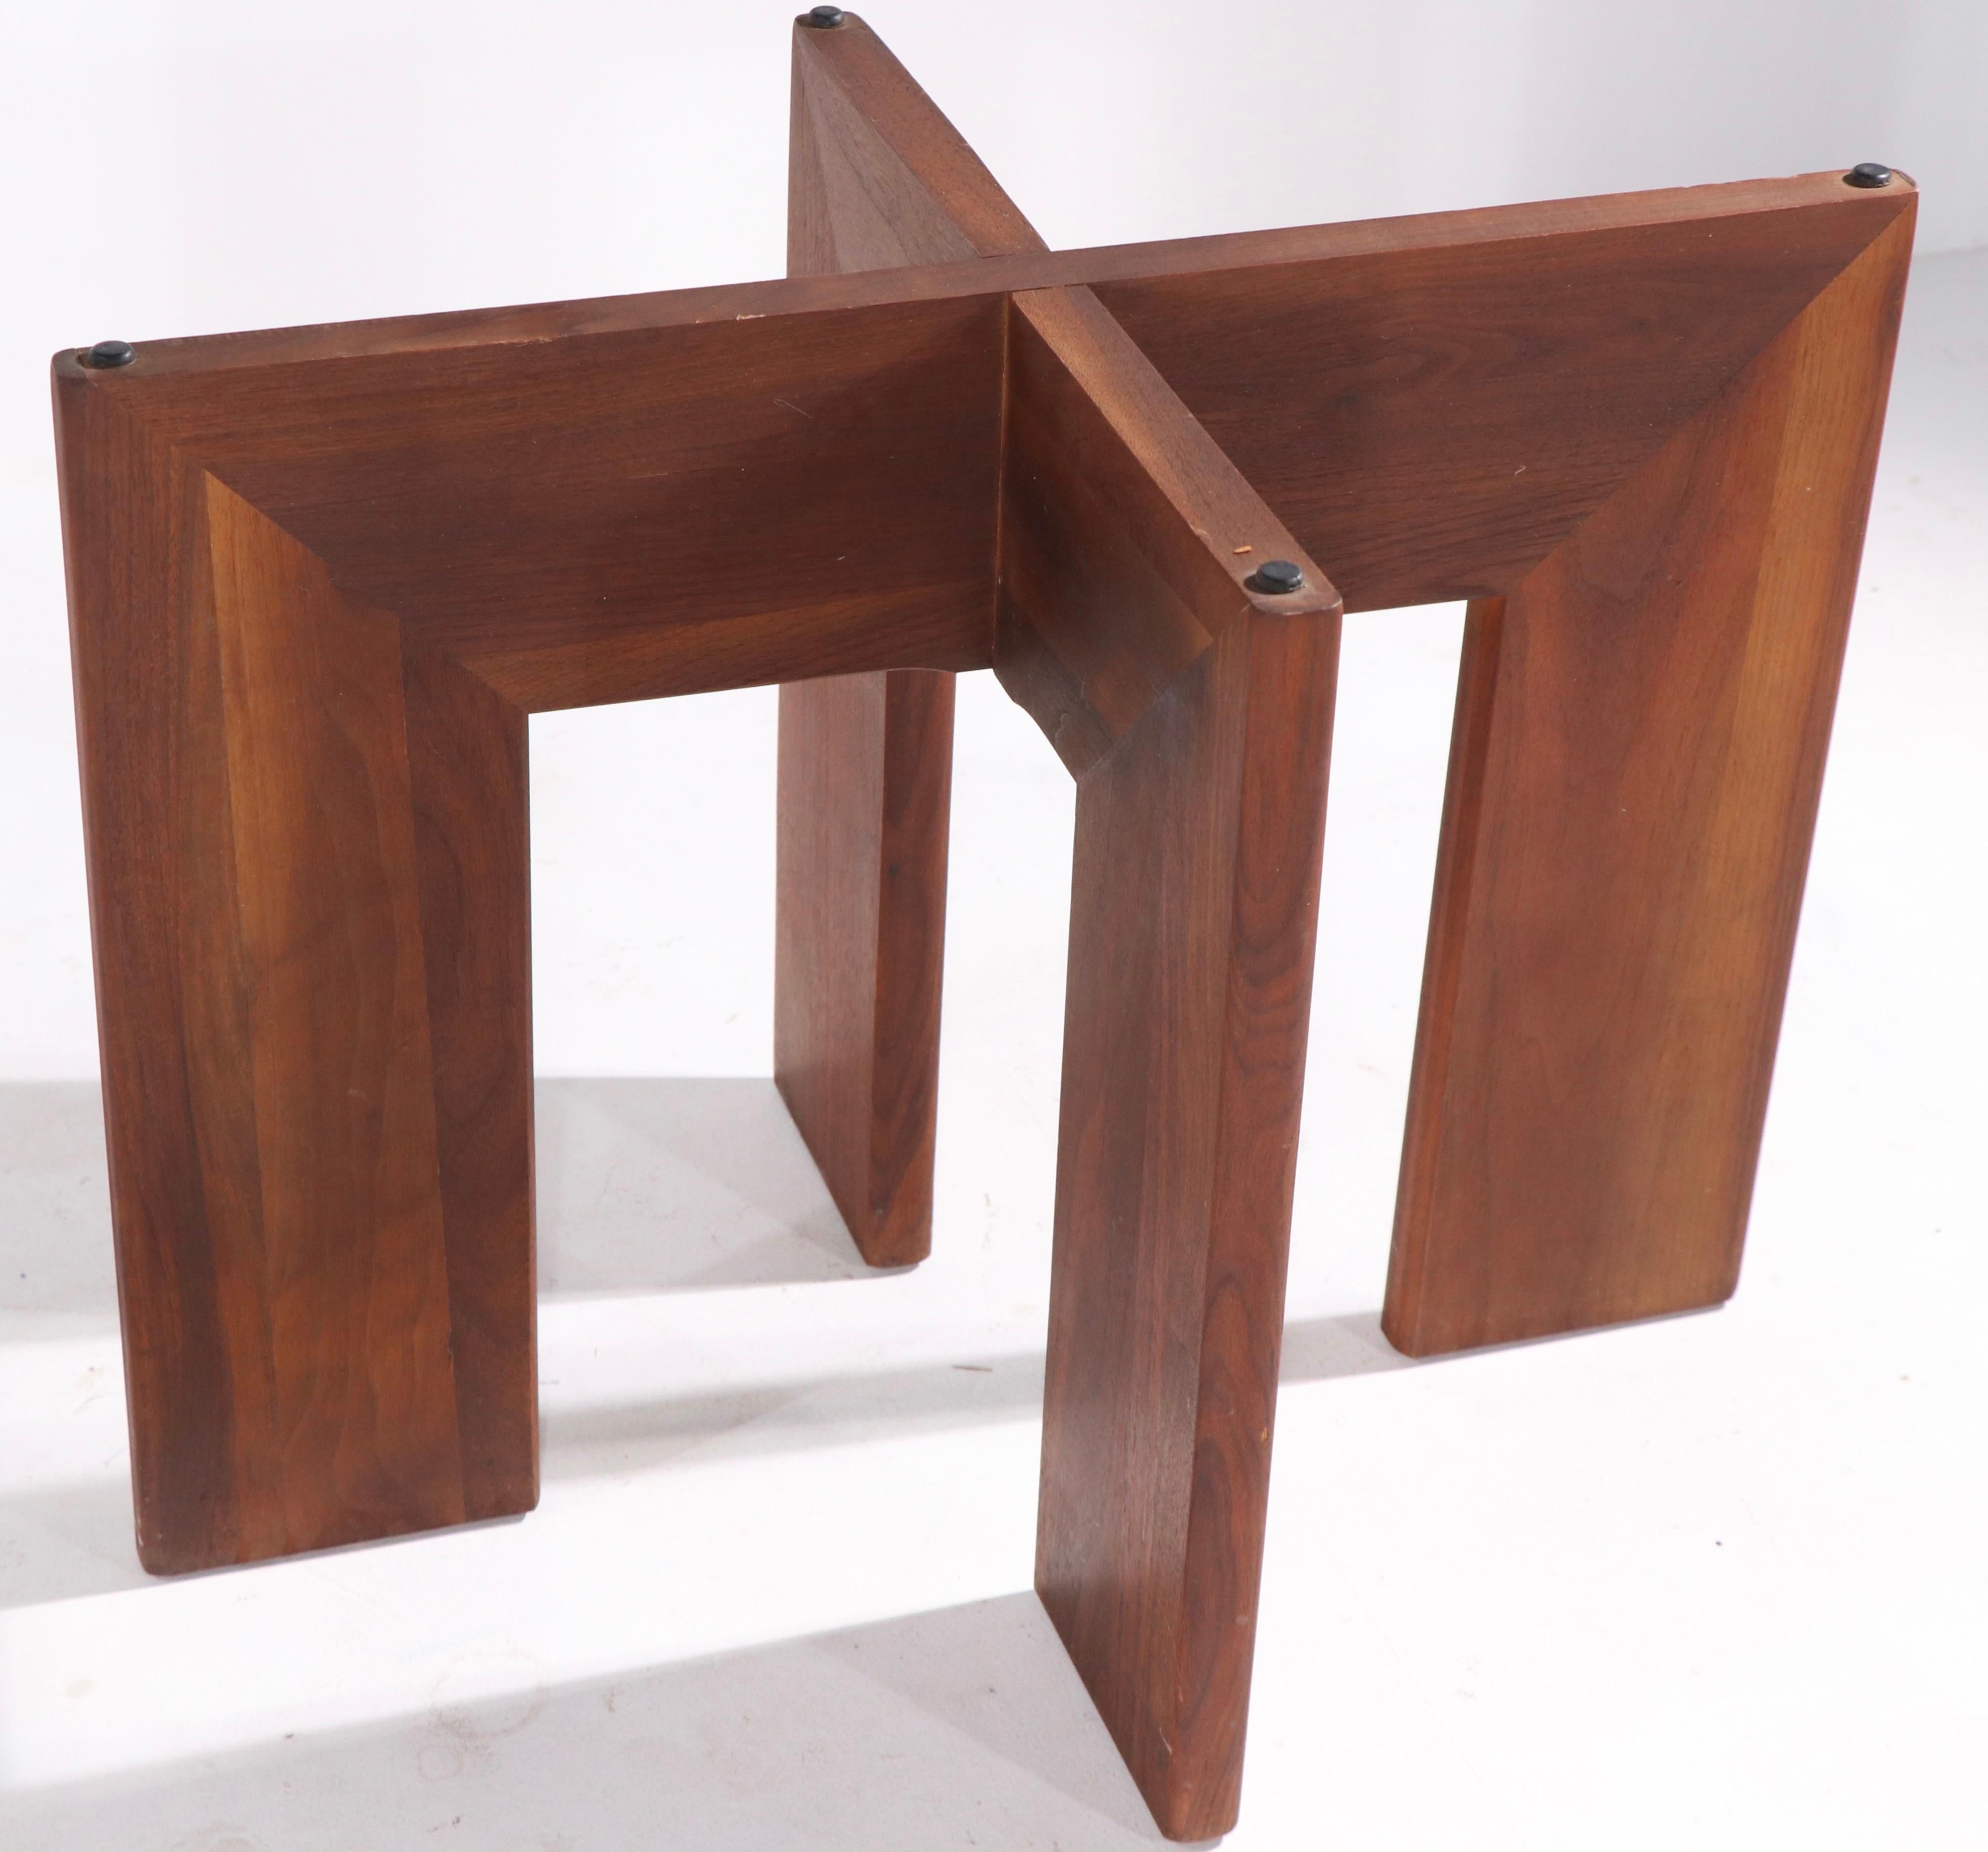 Brutalist end or side table designed by Adrian Pearsall for Craft Associates, having a faux slate top, on a solid wood base. This table is less common than the glass top tables Pearsall designed, this example is in very good, original condition,